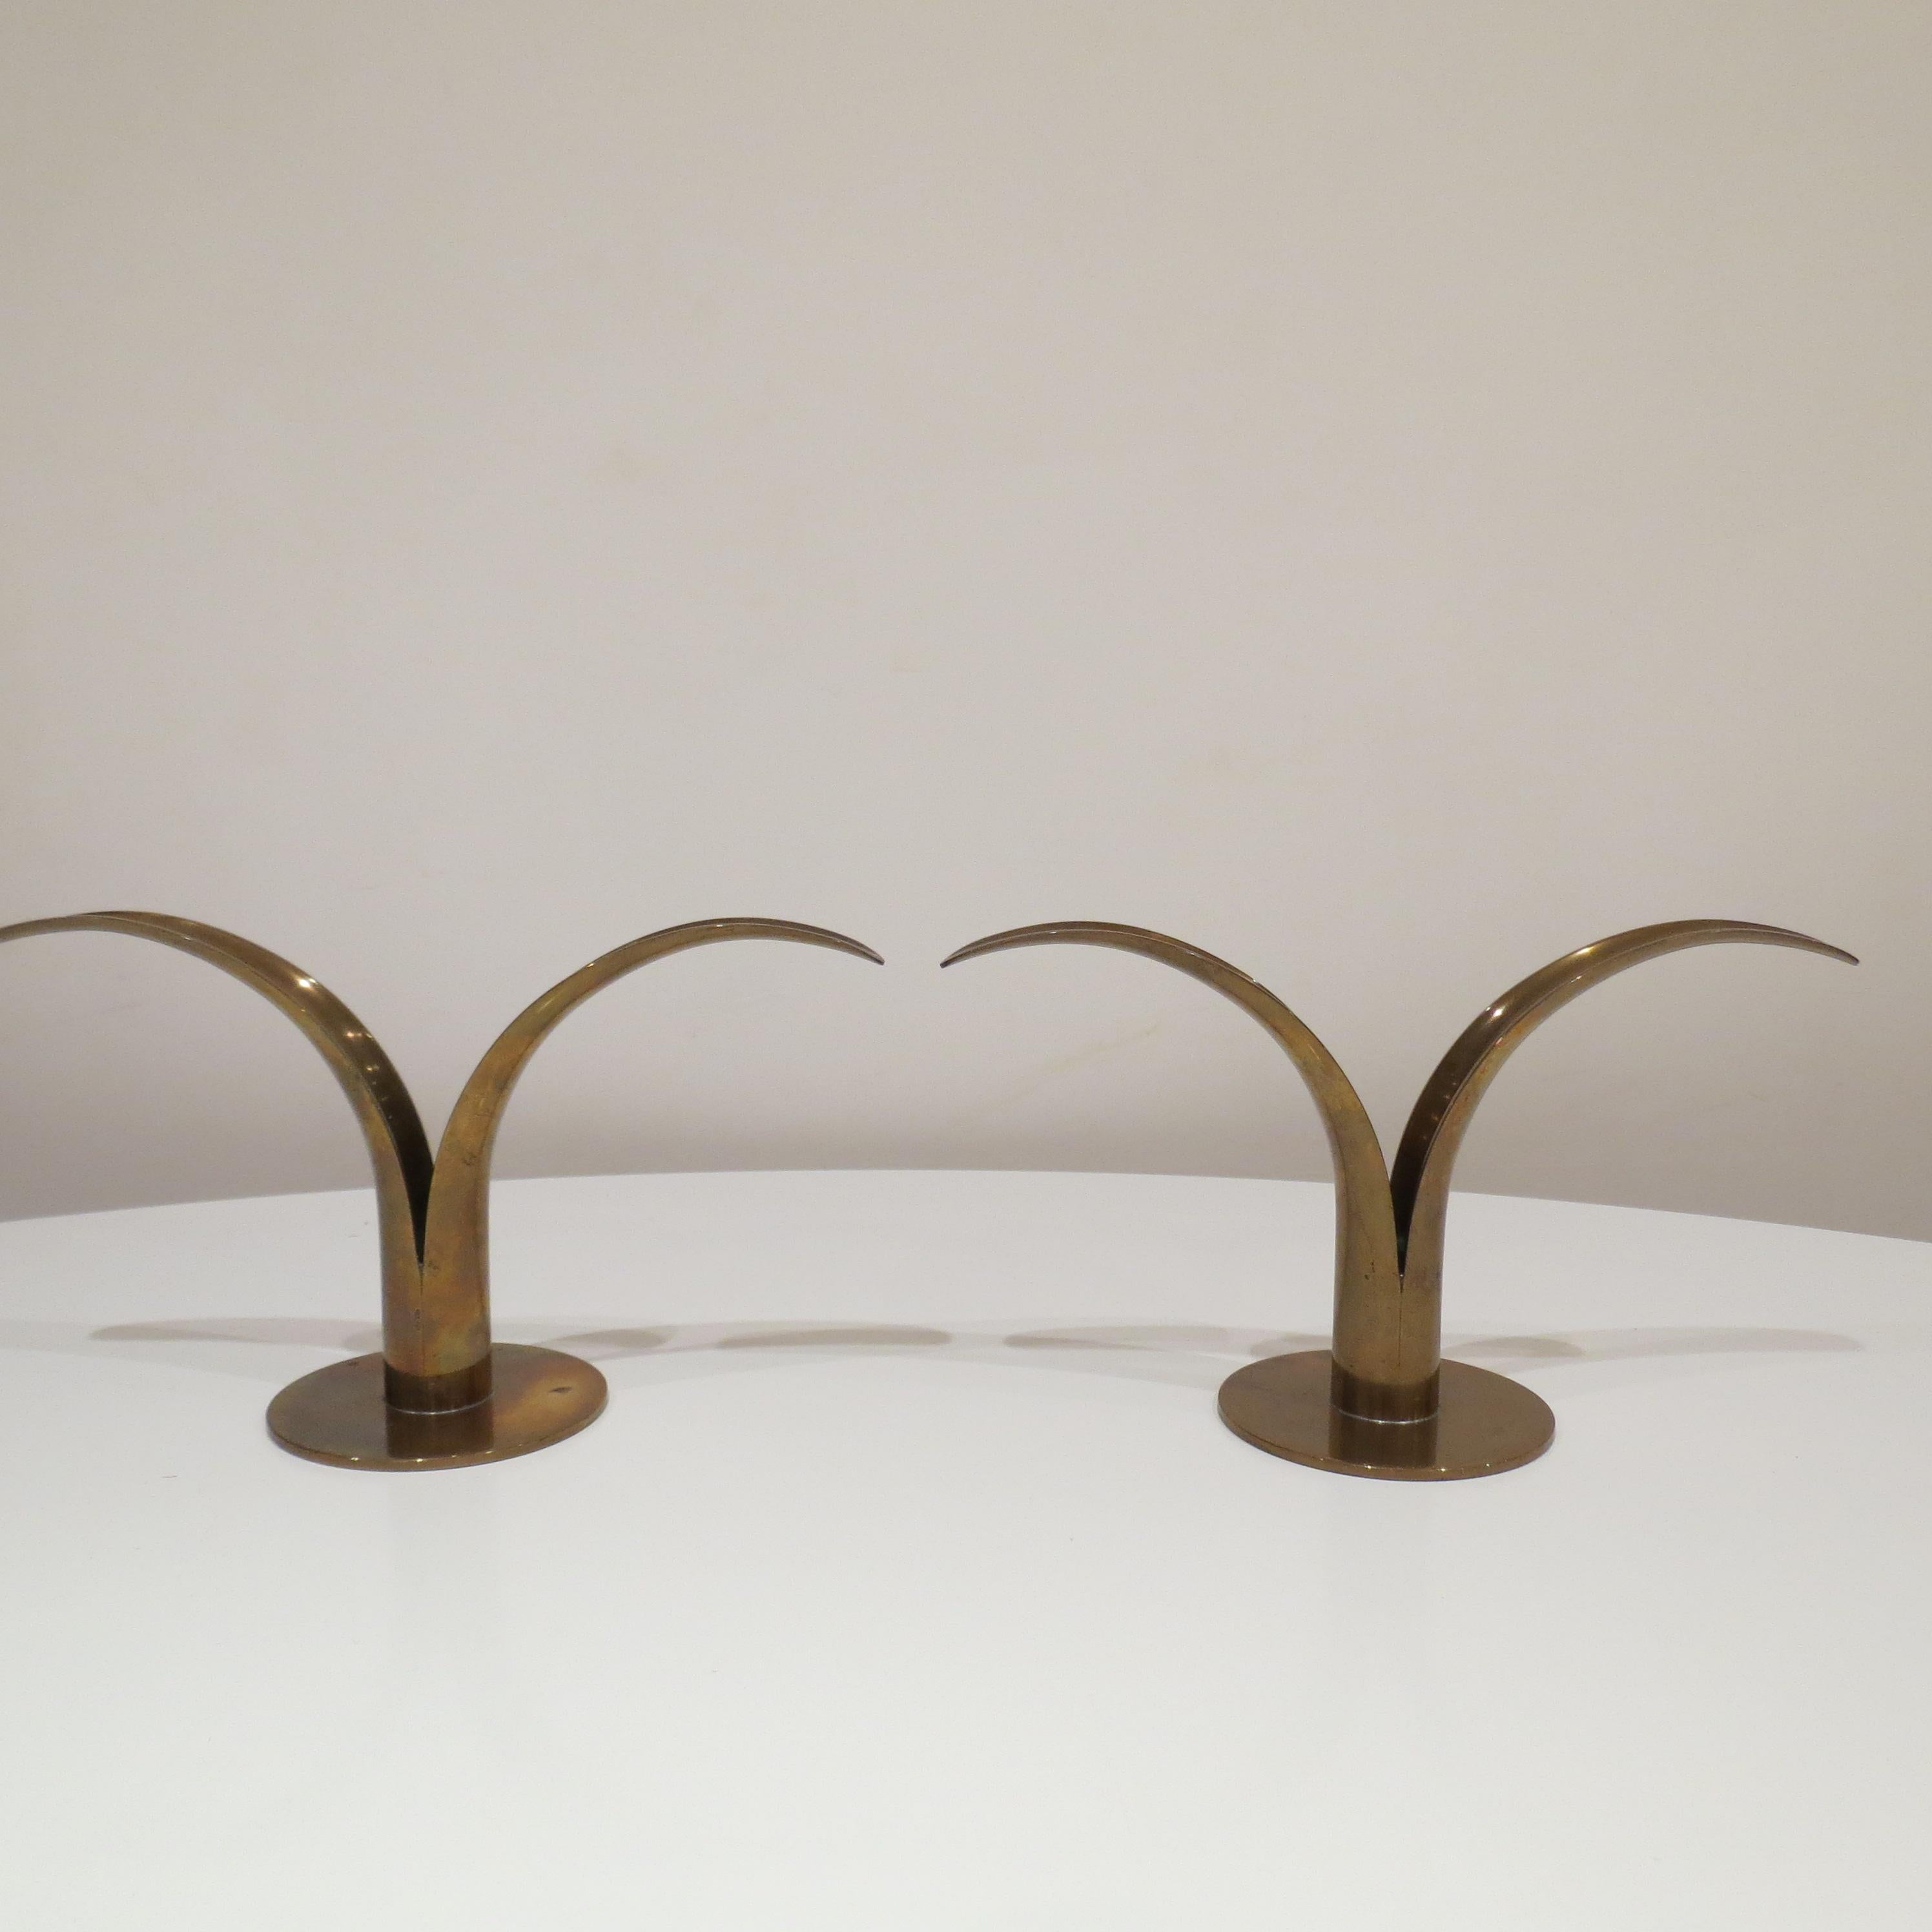 Wonderful pair of 1960s brass candleholders, designed by Iva Alenius Bjork for Ystad-Metall. In lovely condition, with a small amount of patination to the brass. Stamped to the underside Ystad-Metall made in Sweden AB
Price is per pair.
 